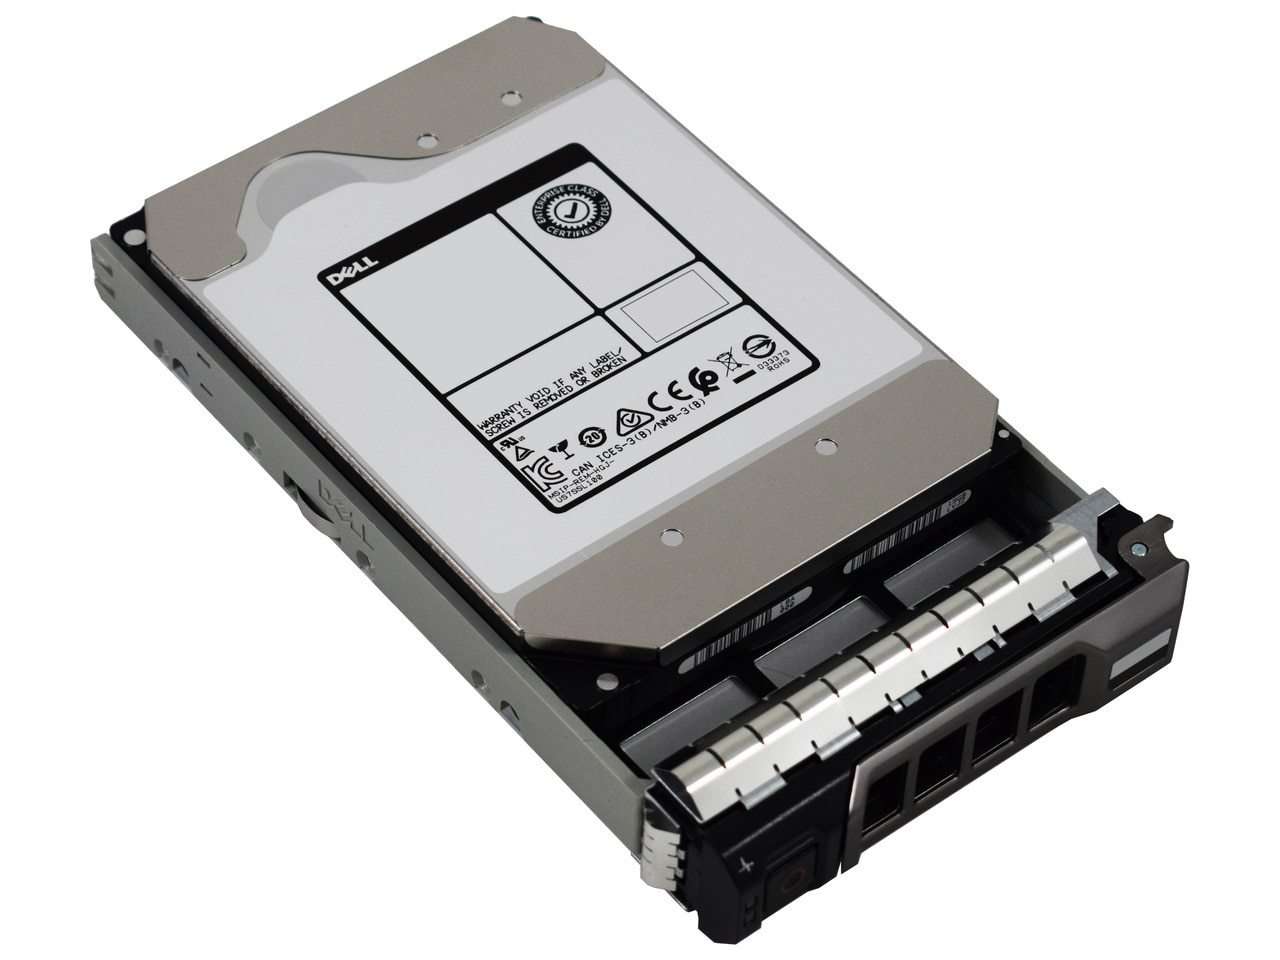 Dell G13 400-AKZG 6TB 7.2K RPM SATA 6Gb/s 512e 3.5" Manufacturer Recertified HDD